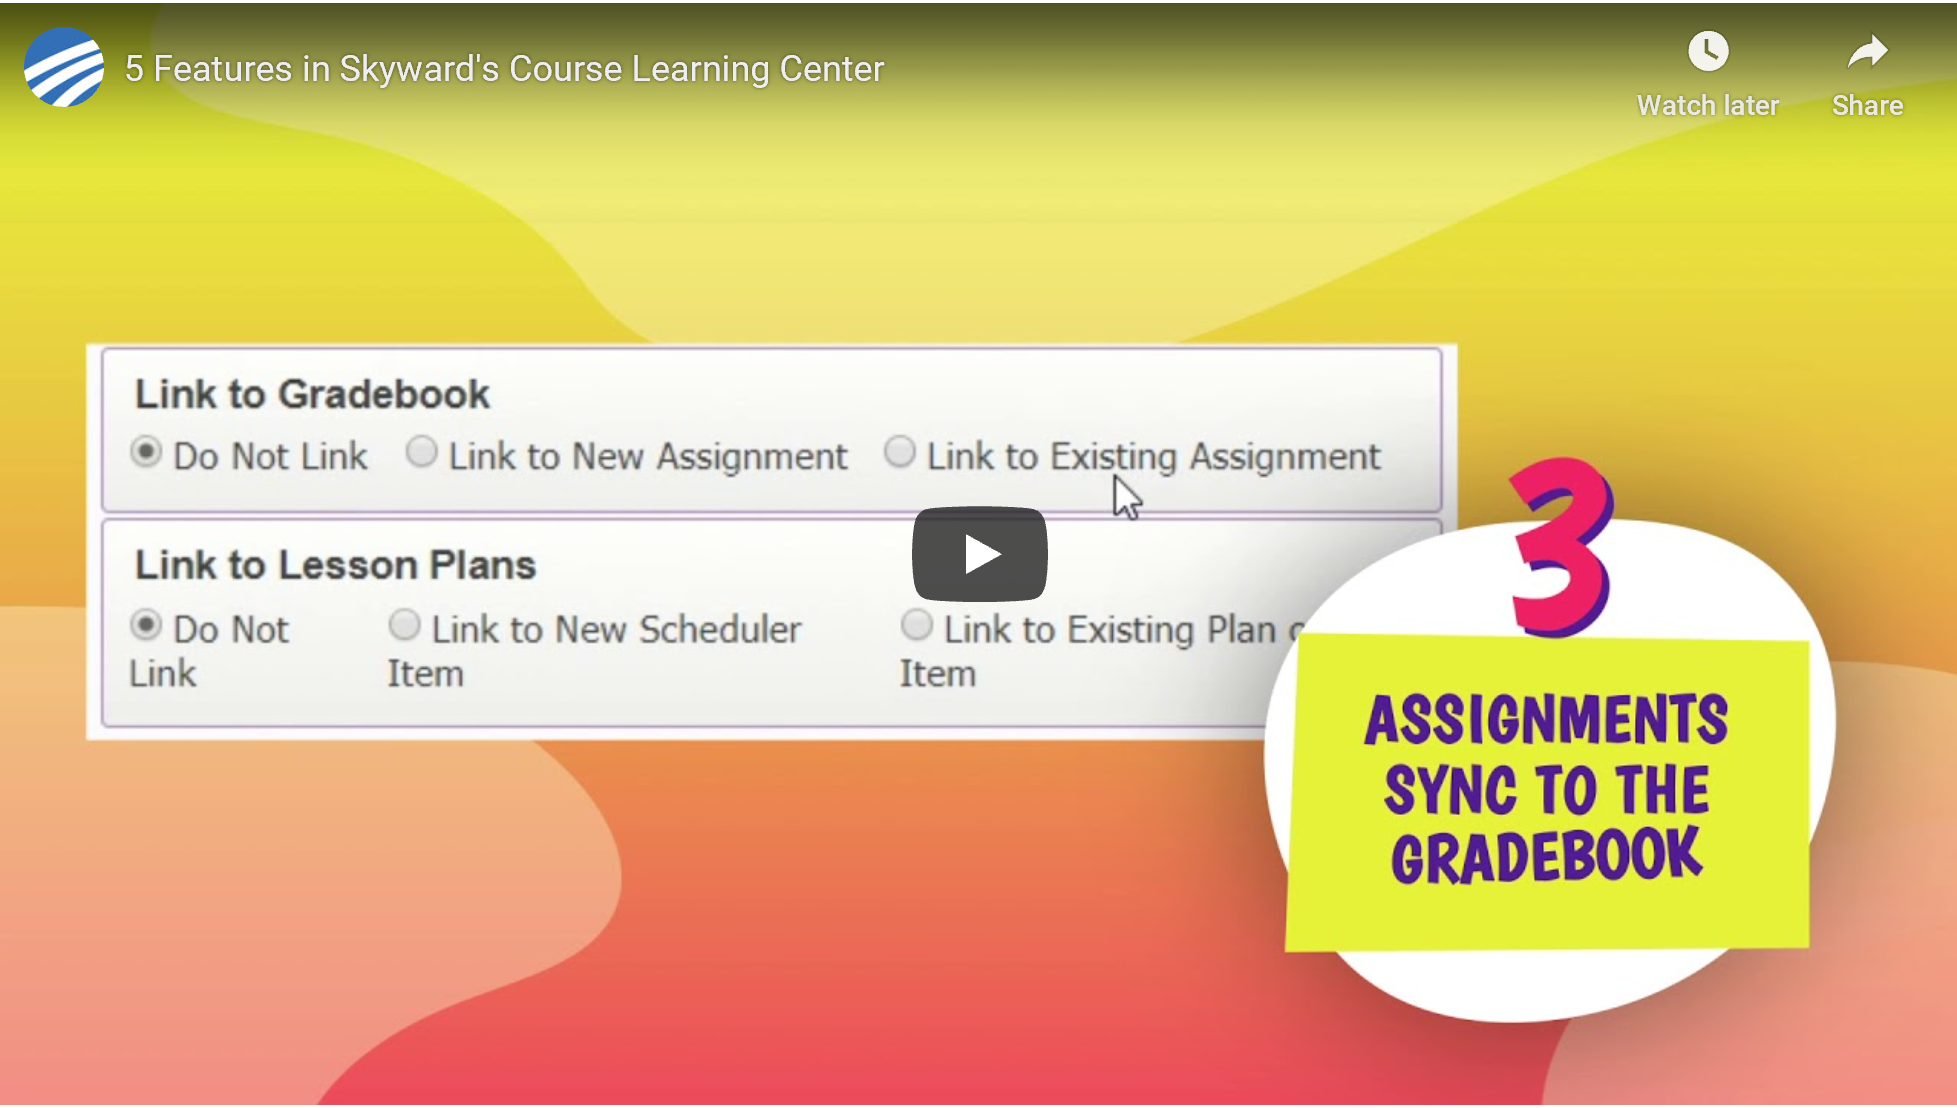 Course Learning Center Video